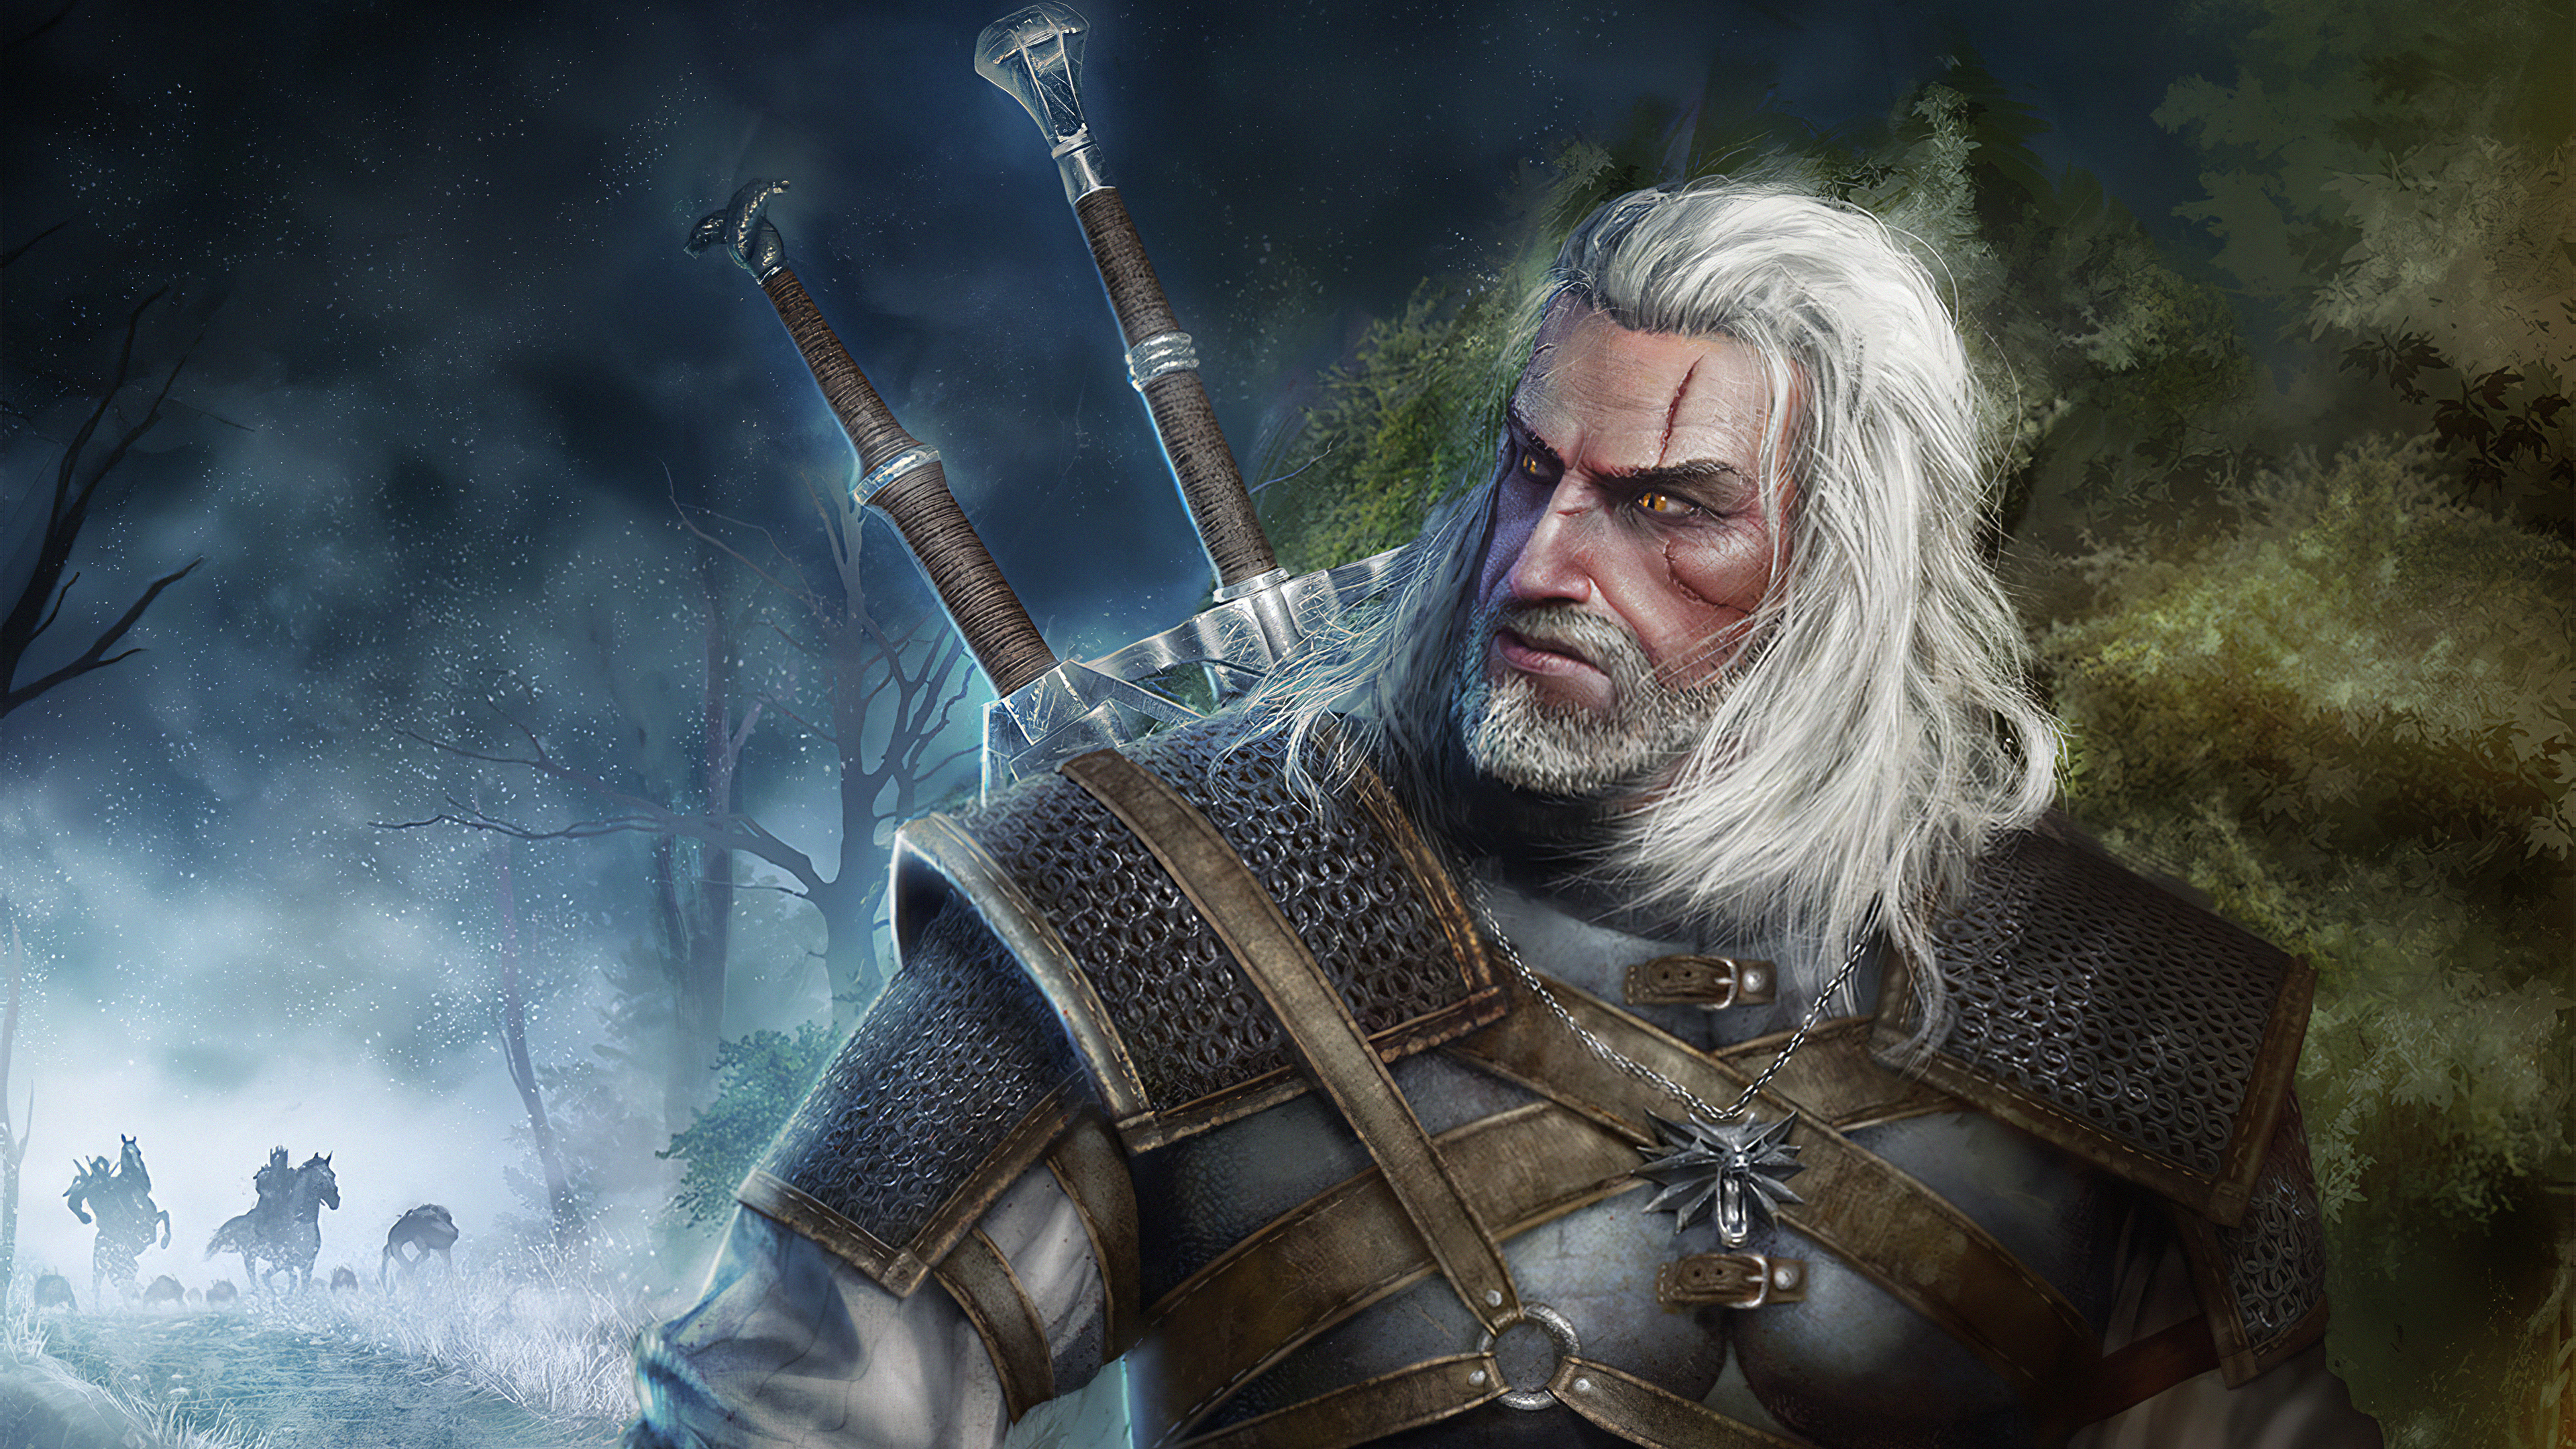 Wallpapers The Witcher 3 games rendering on the desktop